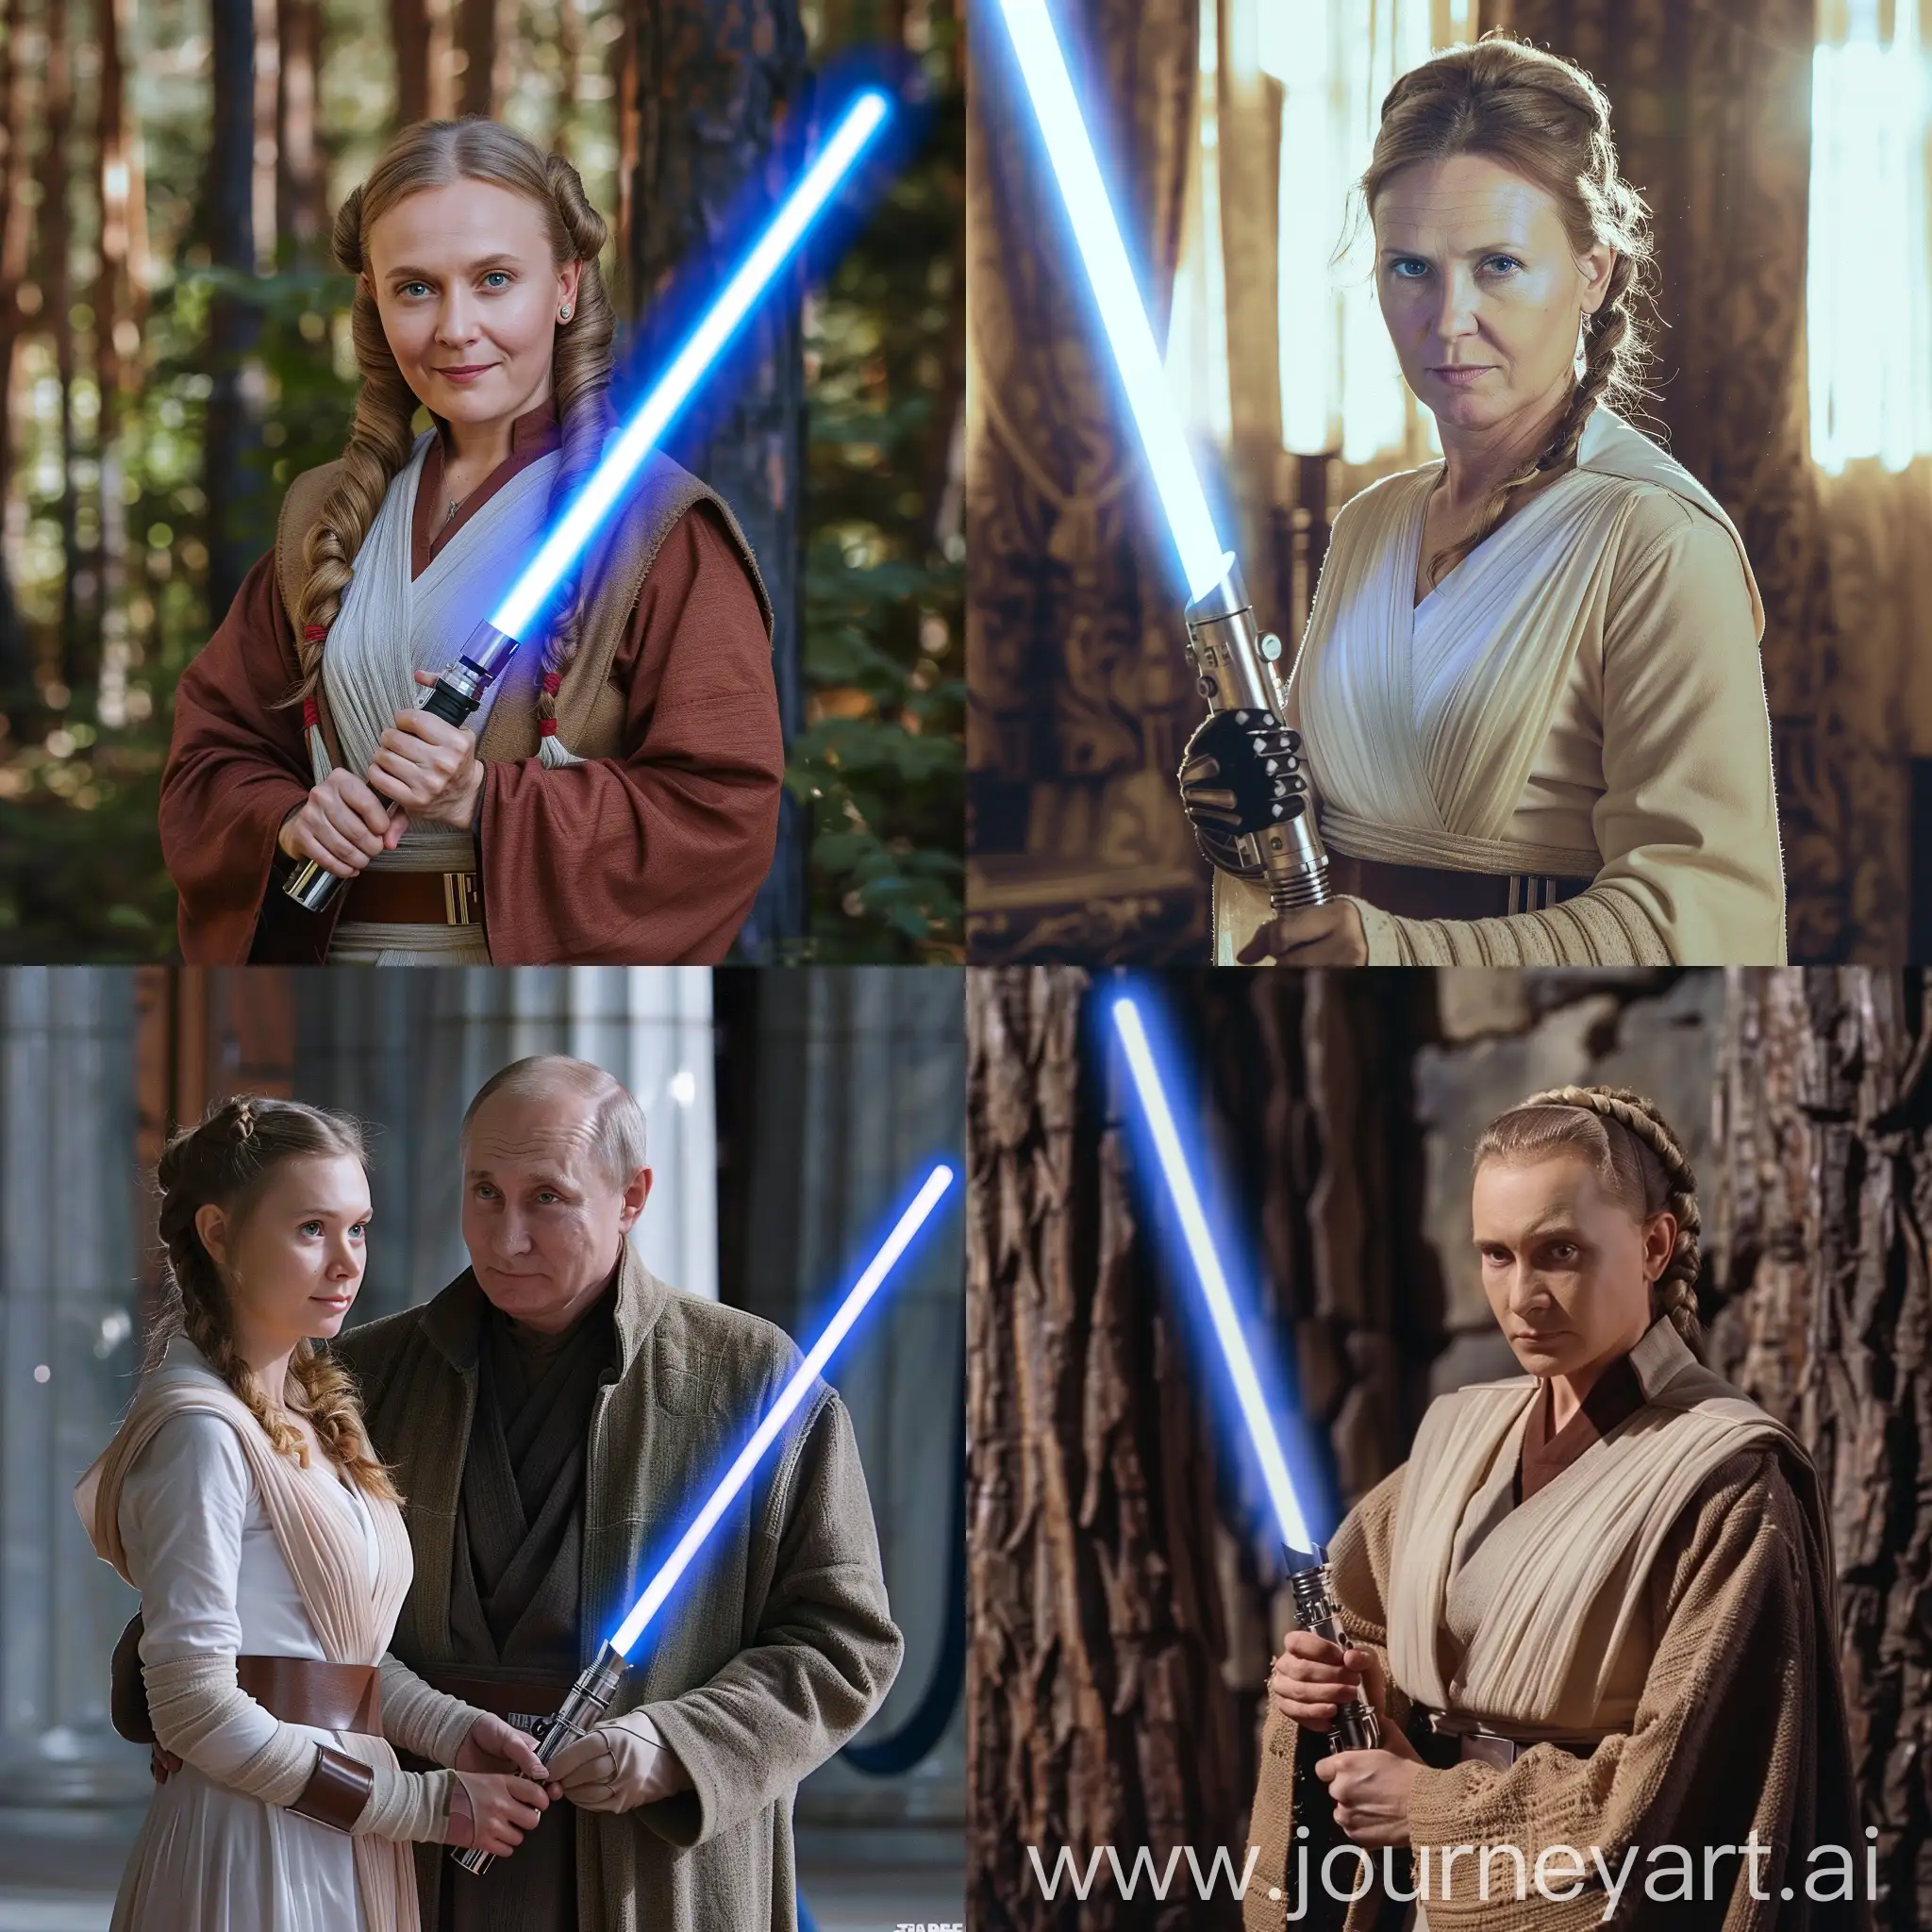 Putin-Presents-Beautiful-Girl-with-Lightsaber-in-Jedi-Dedication-Ceremony